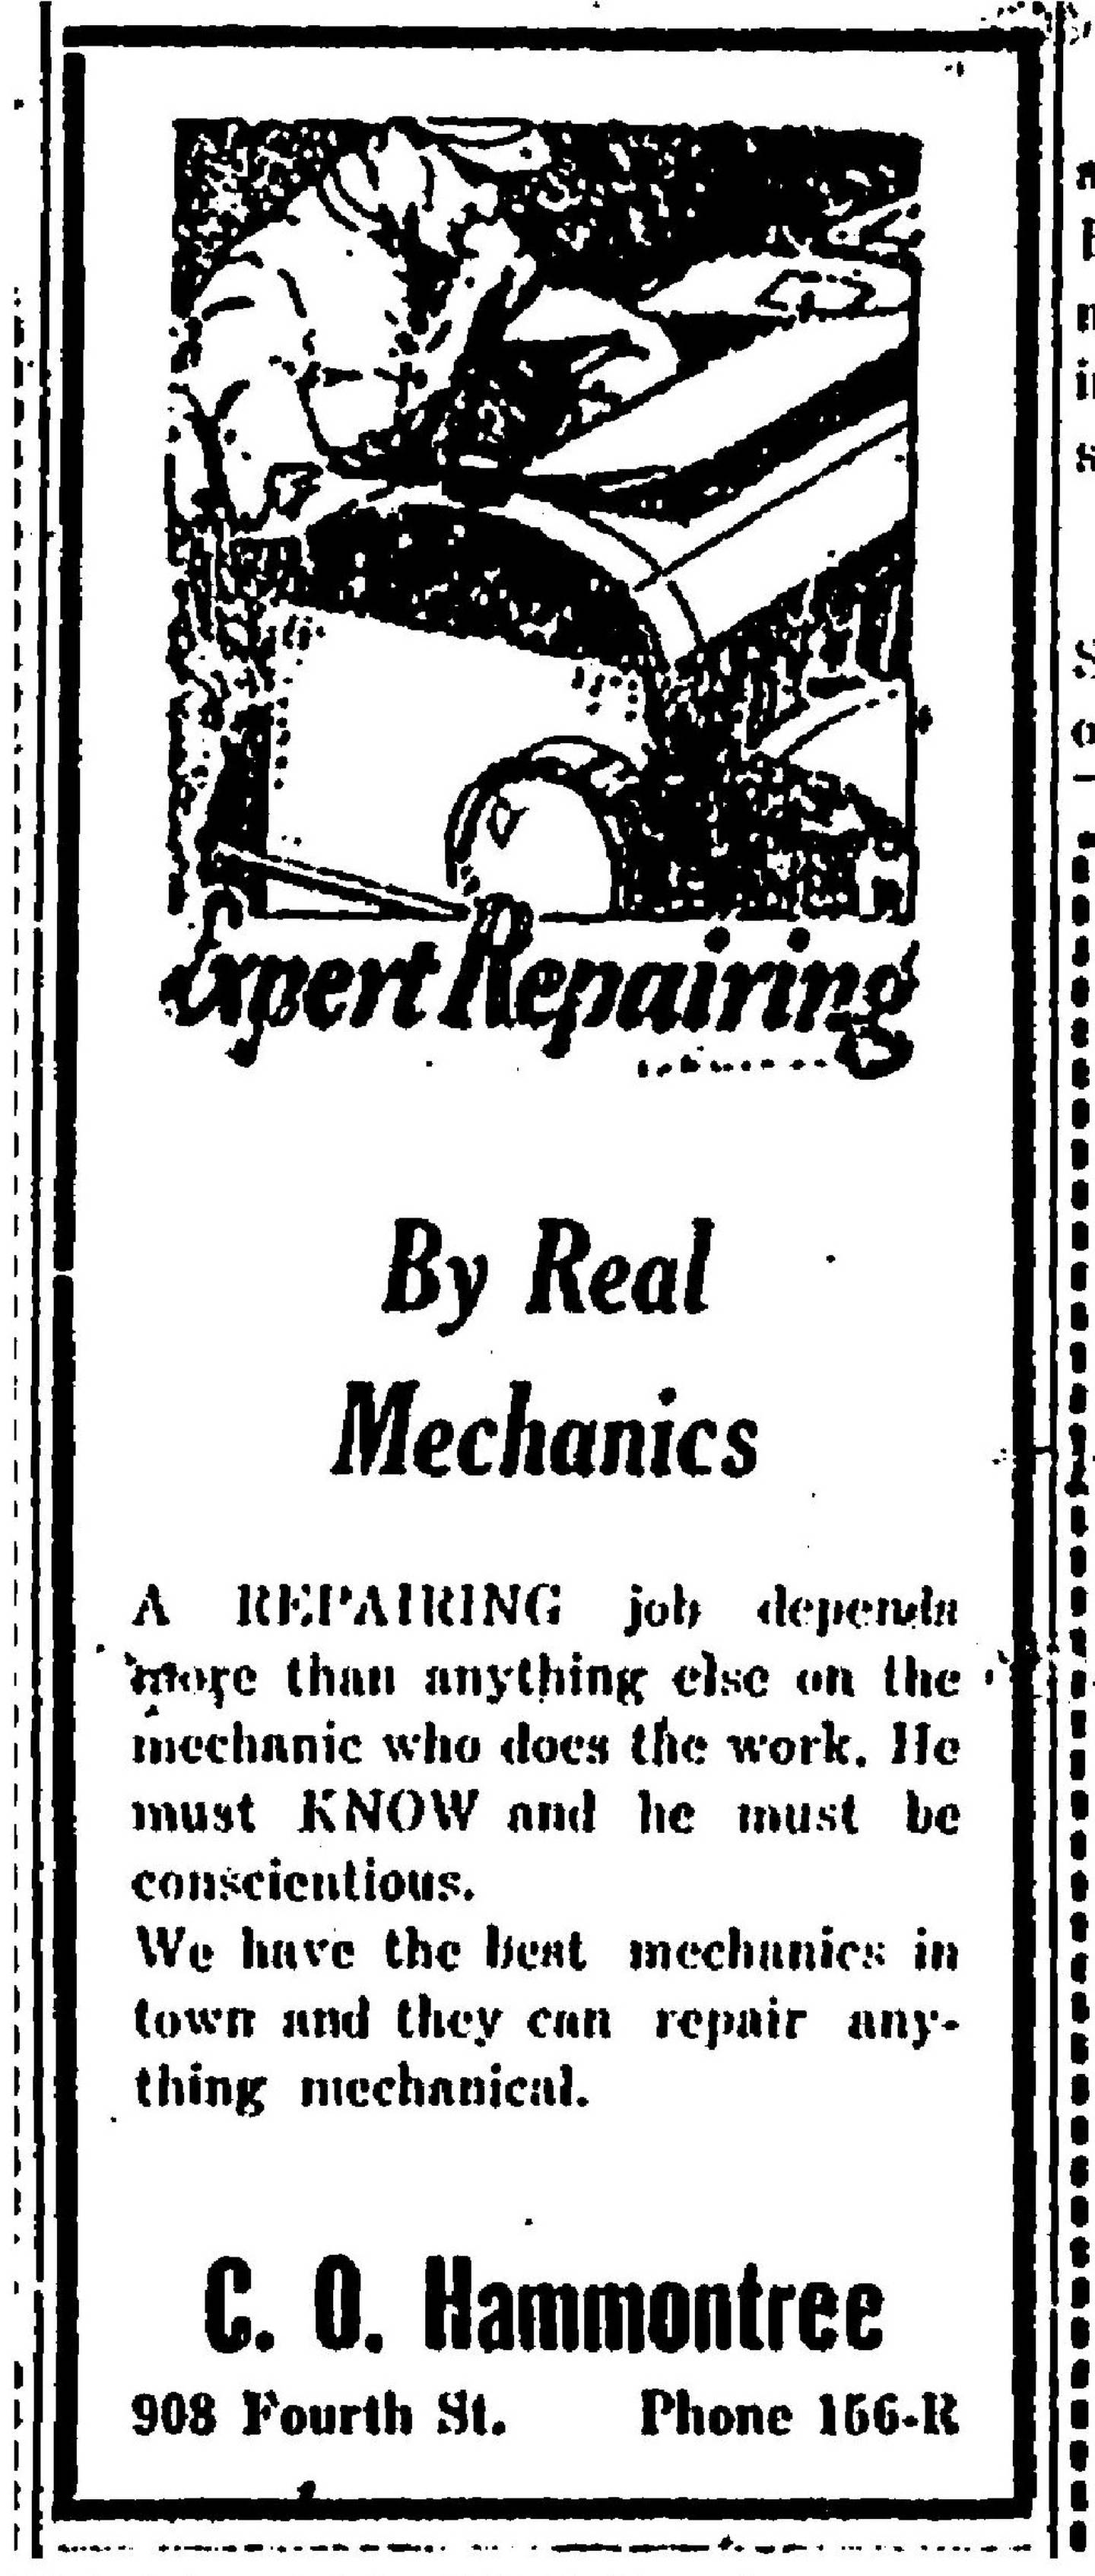 An advertisement for Charles Otis Hammontree's repair business from the Anchorage Daily Times' May 12, 1923 edition